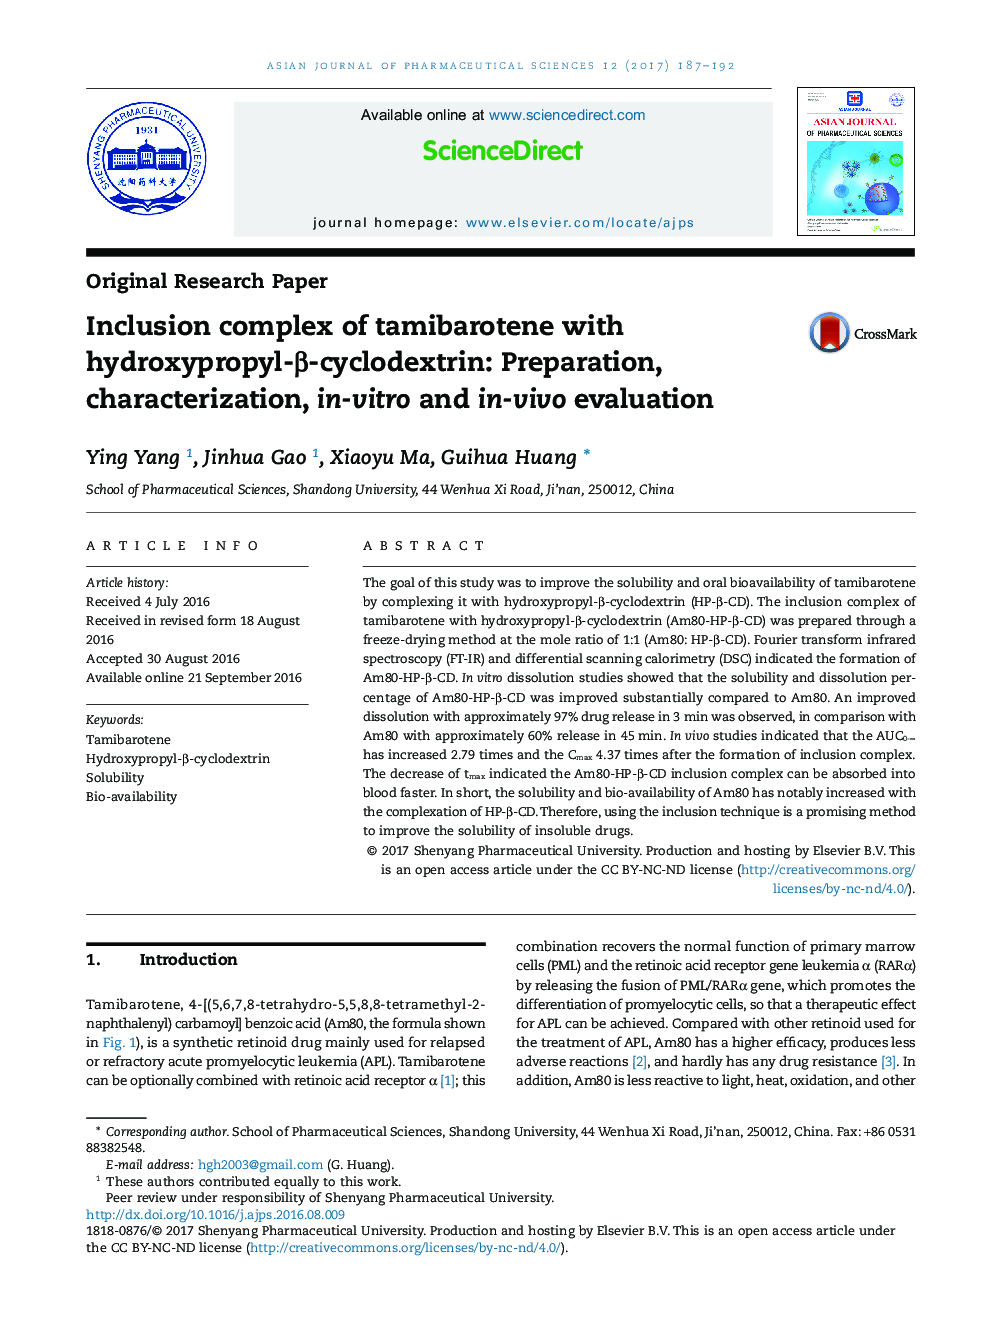 Inclusion complex of tamibarotene with hydroxypropyl-Î²-cyclodextrin: Preparation, characterization, in-vitro and in-vivo evaluation